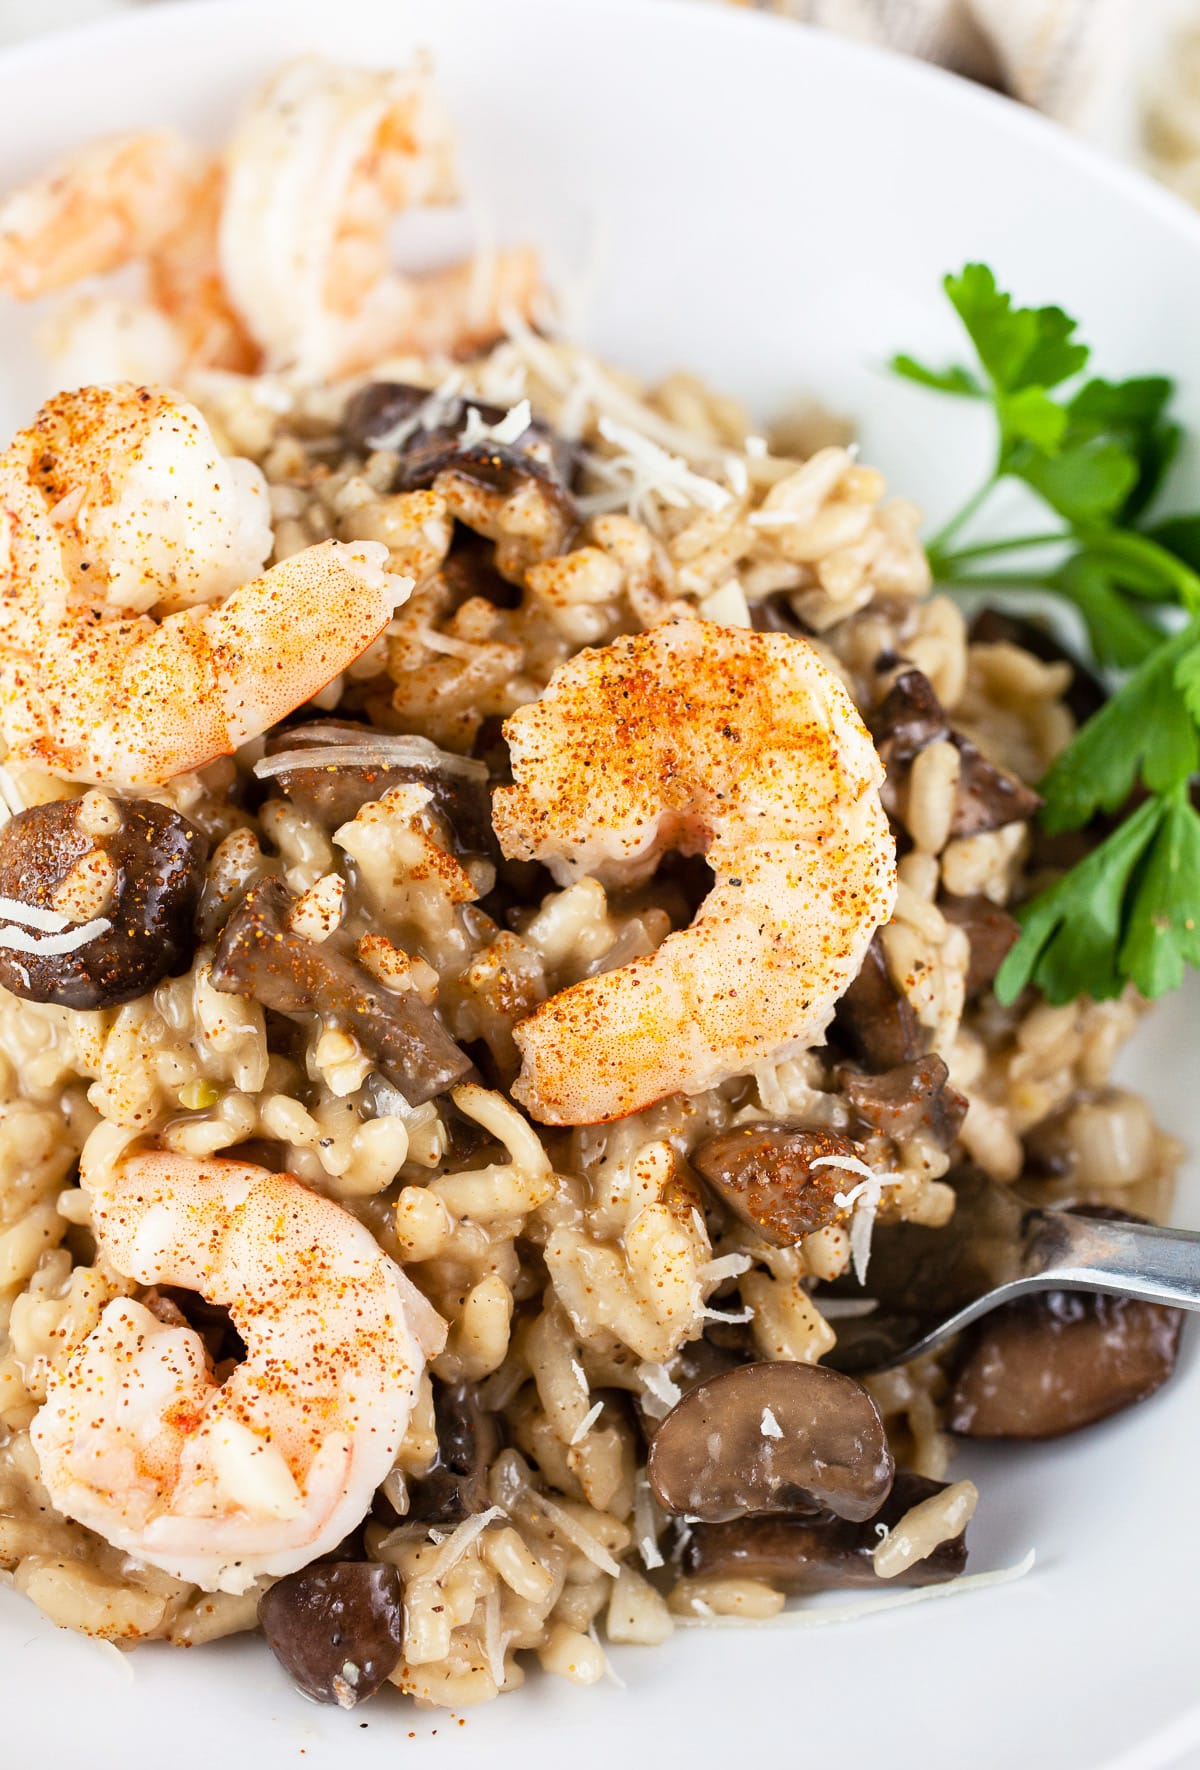 Mushroom shrimp risotto with parsley in white bowl.